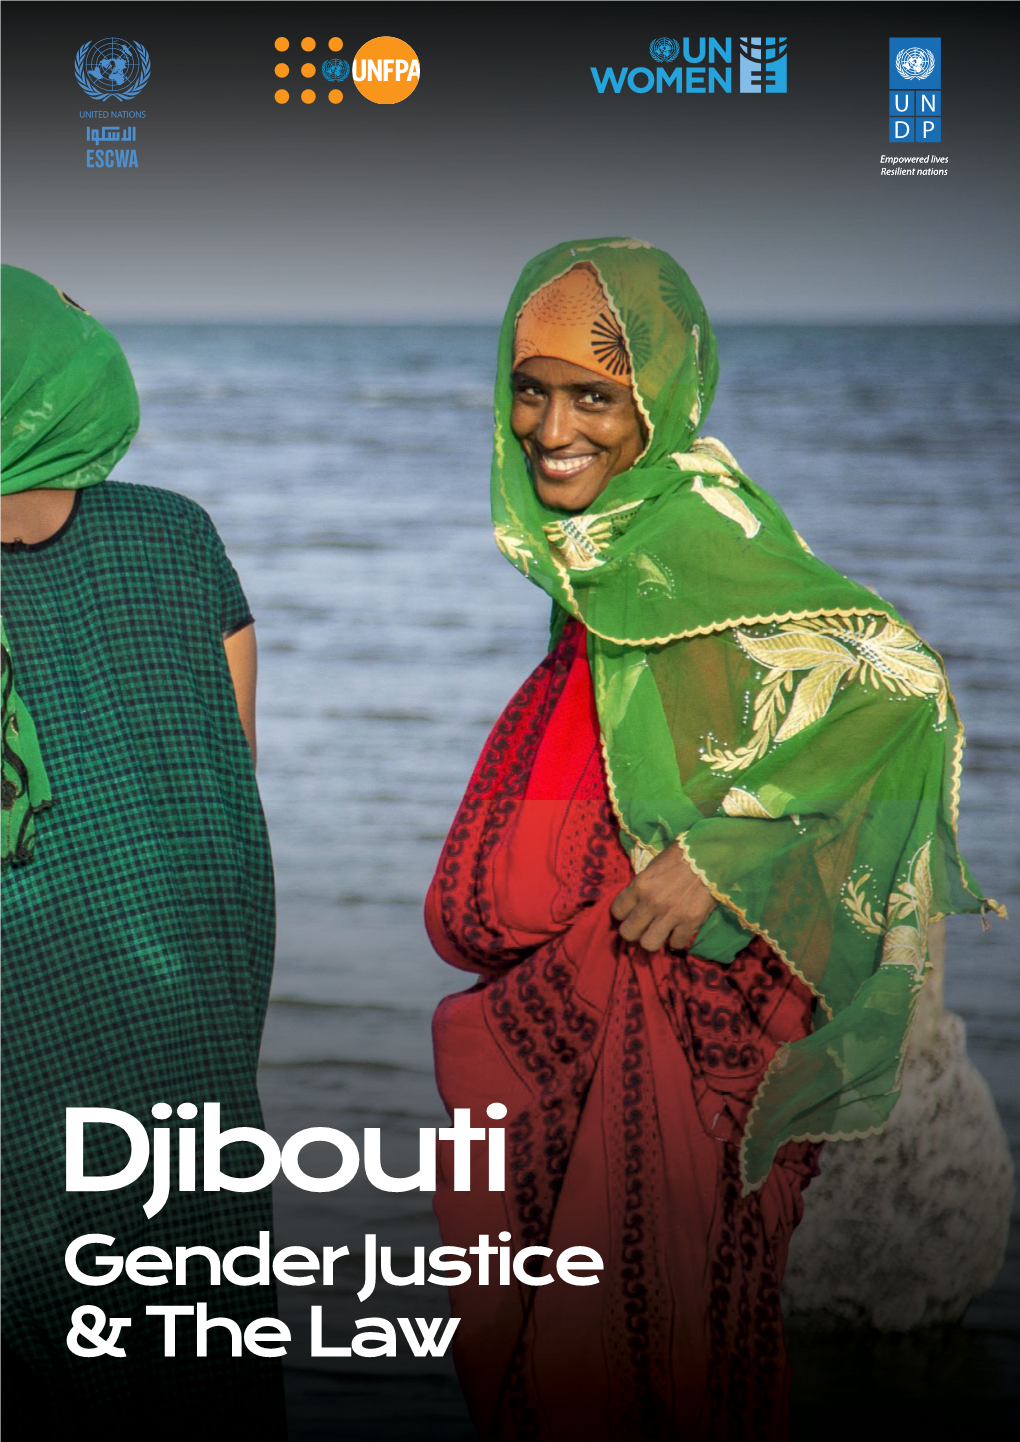 Djibouti Gender Justice & the Law